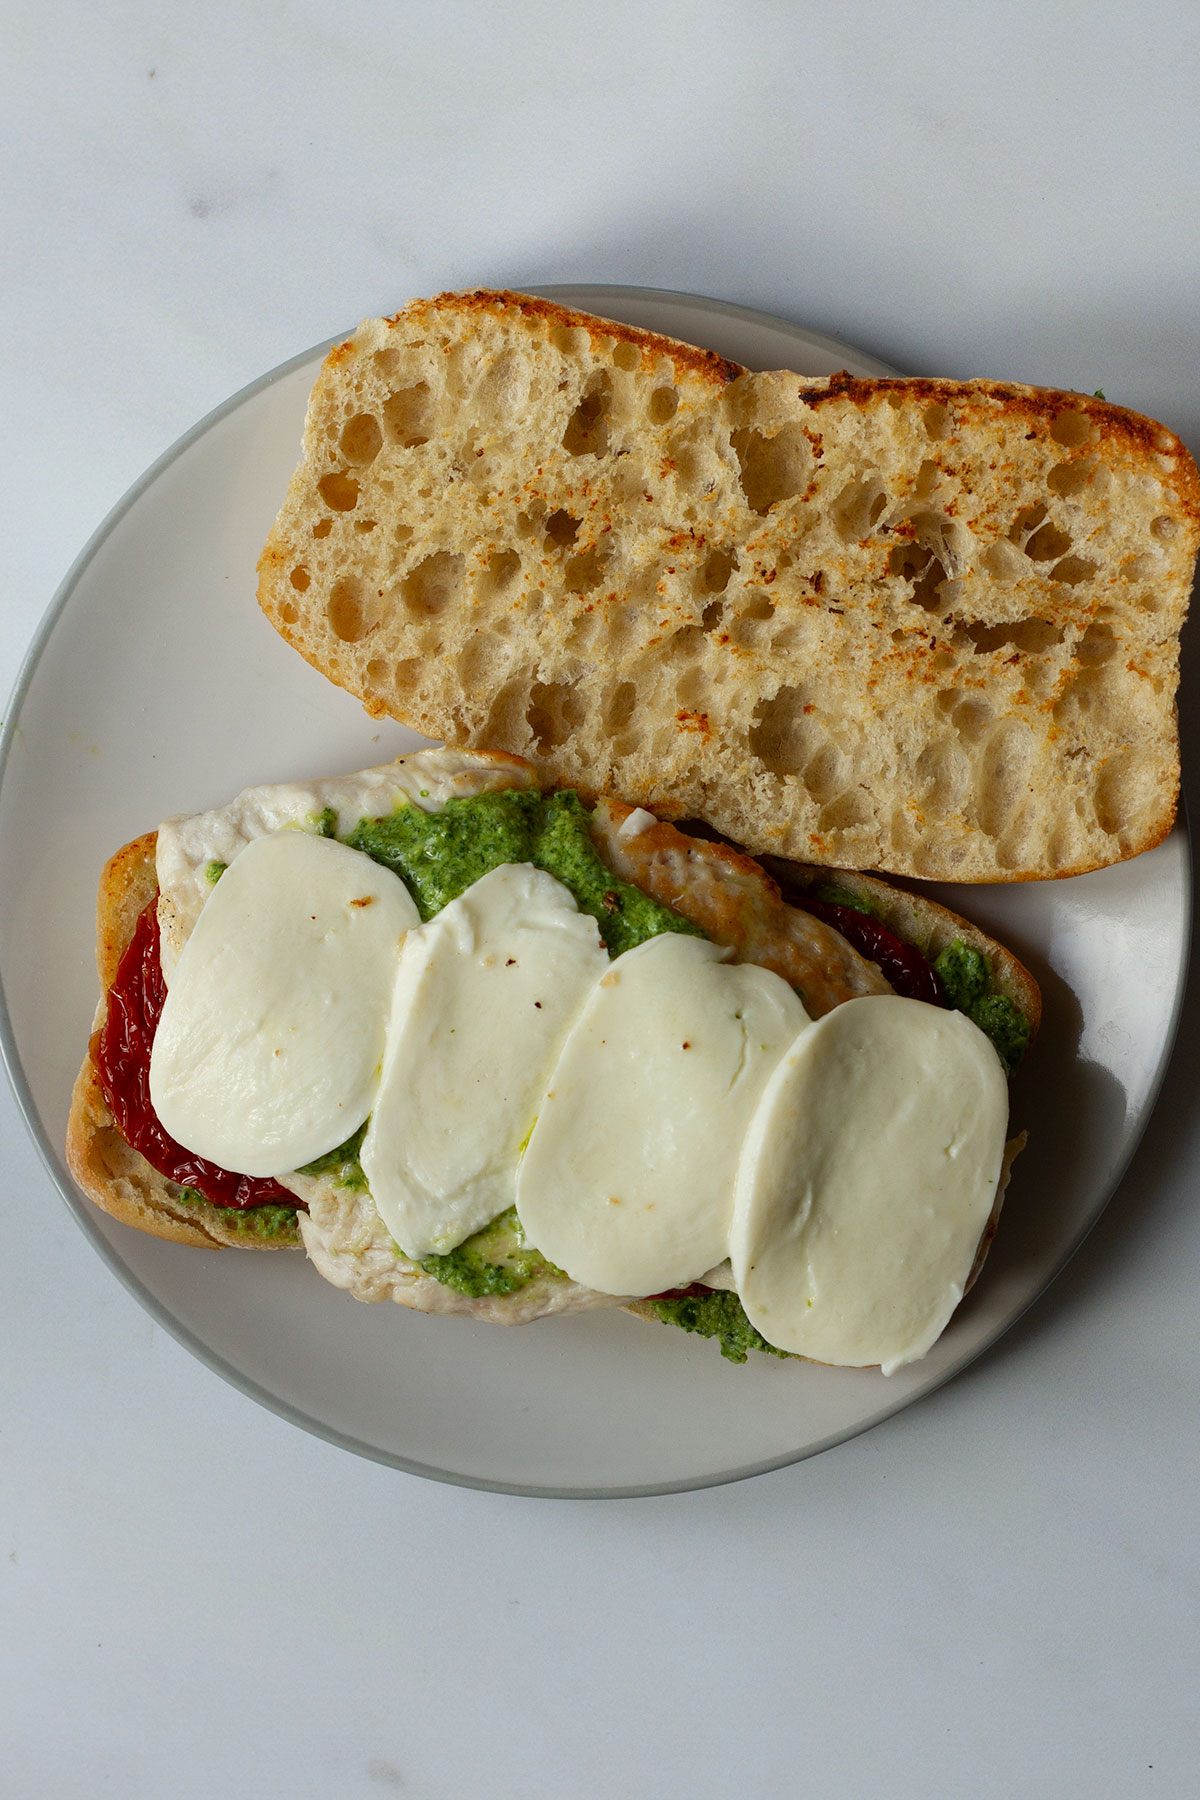 The assembled sandwich ready to serve showing the pesto sauce, sun-dried tomatoes, chicken, and mozzarella.